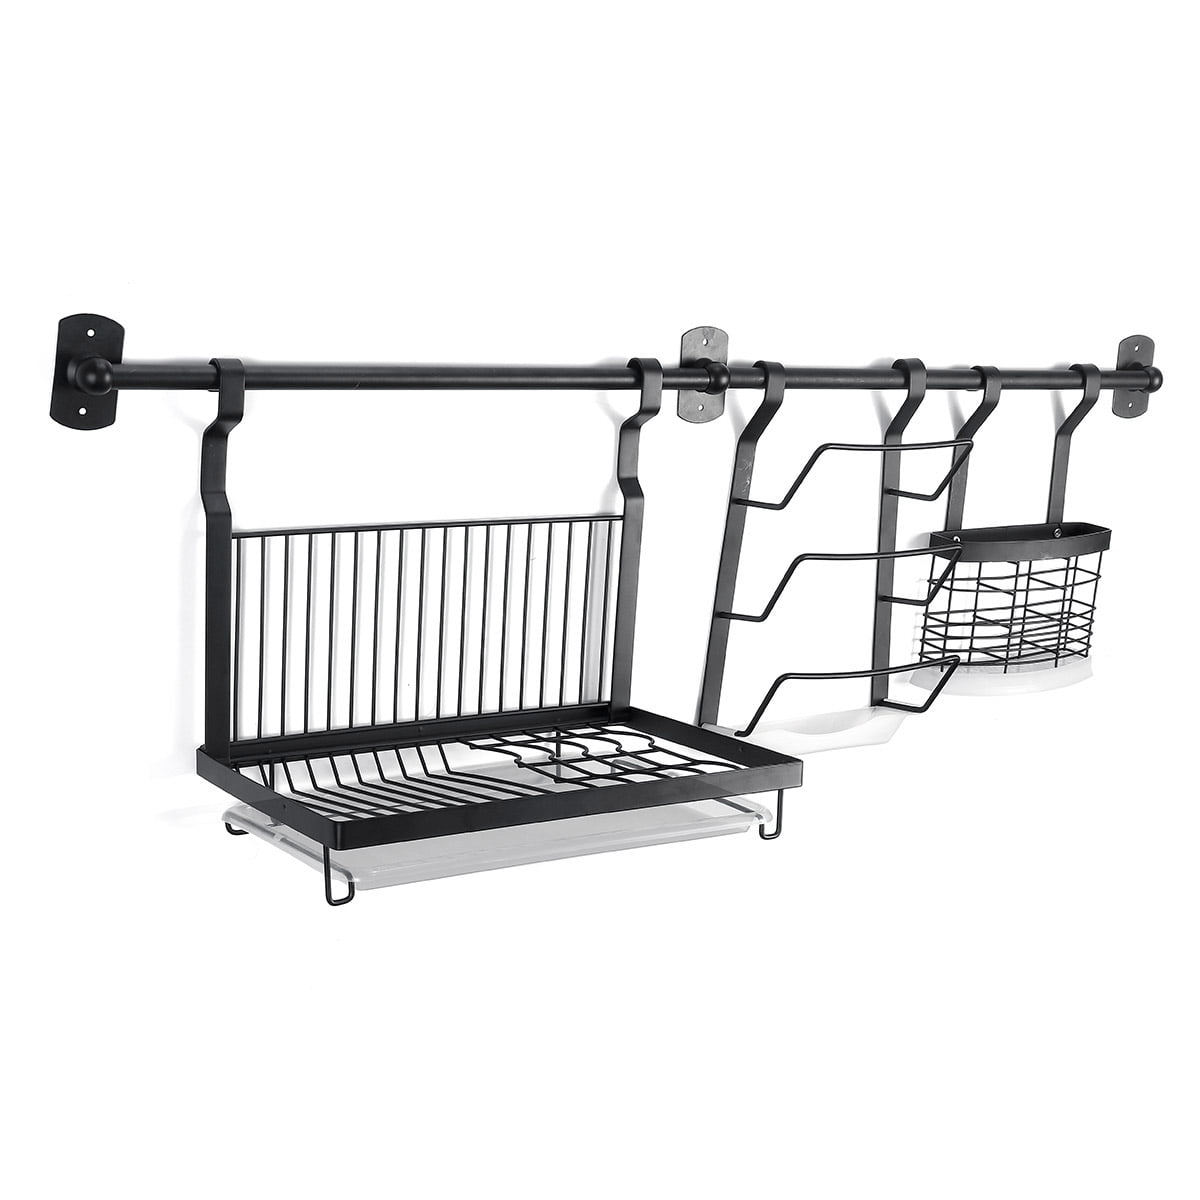 SP1397 Stainless steel Wall mounted dish drying rack 104x30x55h